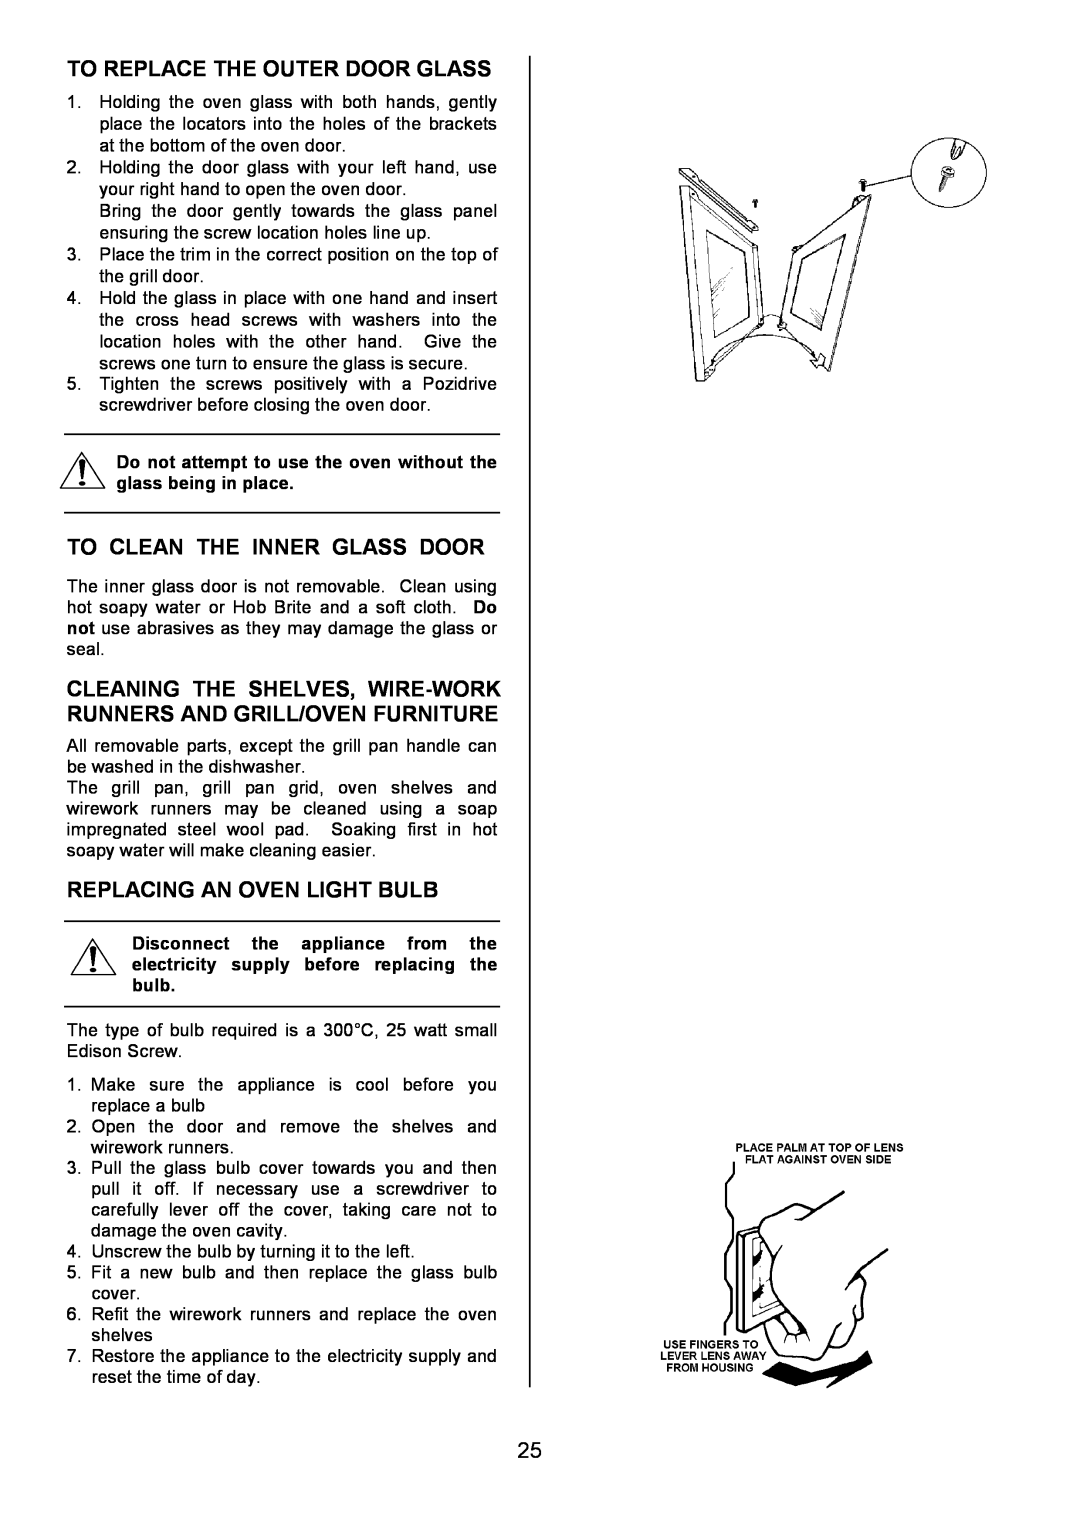 Zanussi ZOU 330 manual To Replace The Outer Door Glass, To Clean The Inner Glass Door, Replacing An Oven Light Bulb 